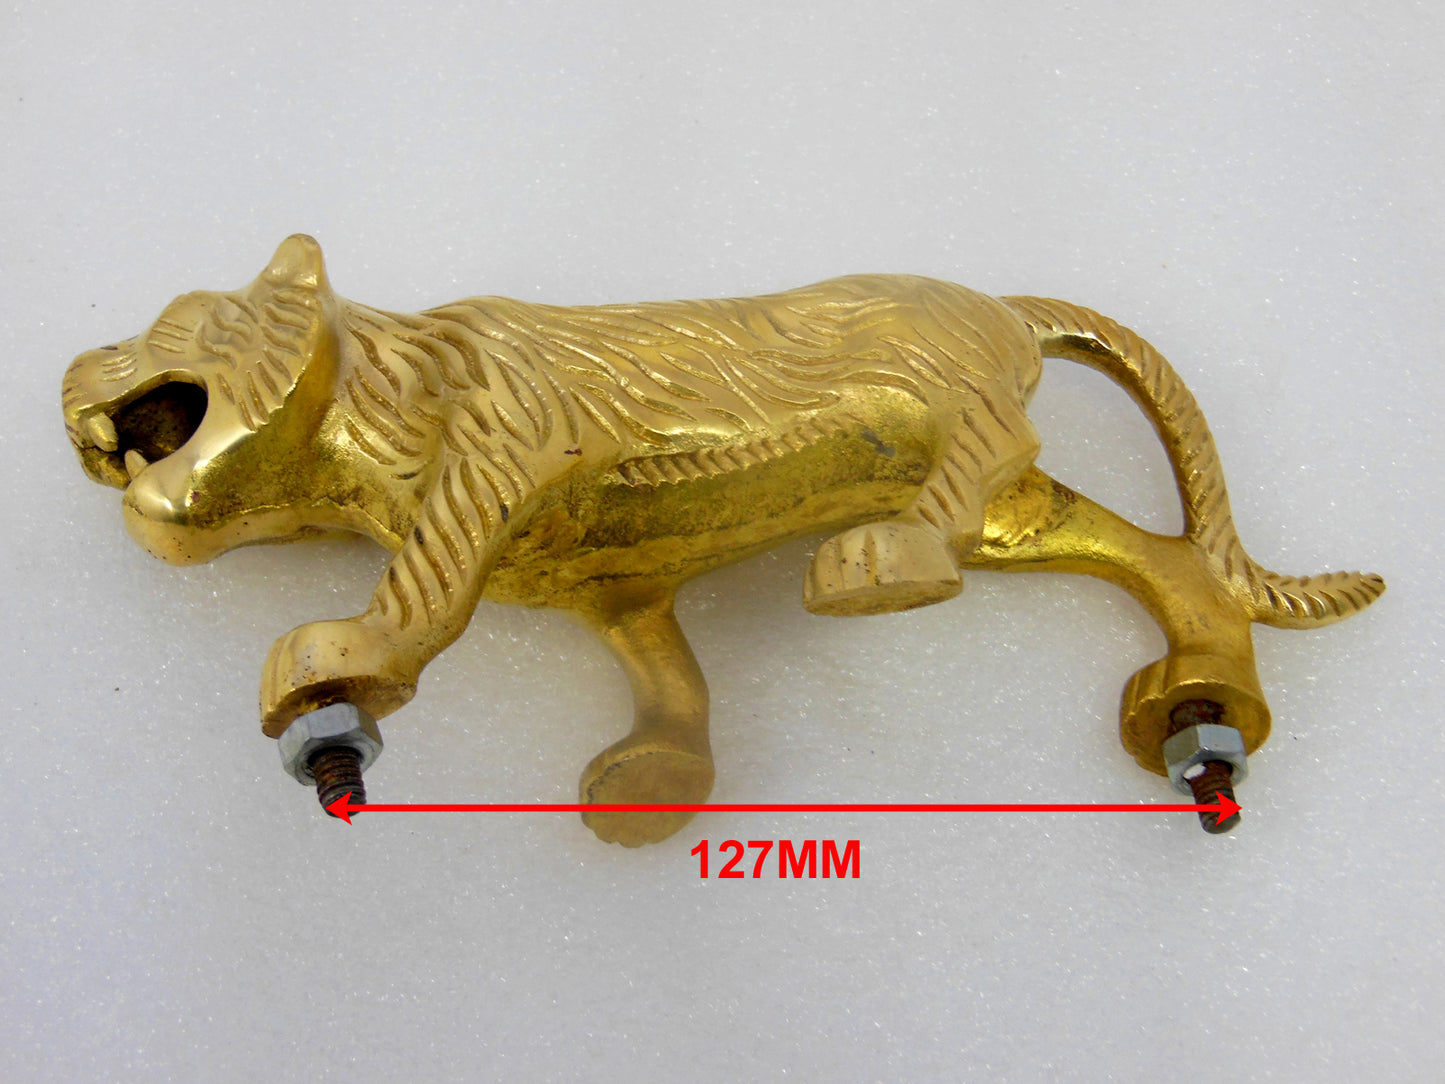 BRASS BIG TIGER / LION FOR FRONT MUDGUARD UNIVERSAL FOR ALL BIKES ROYAL ENFIELD ,JAWA ,BSA ,ETC